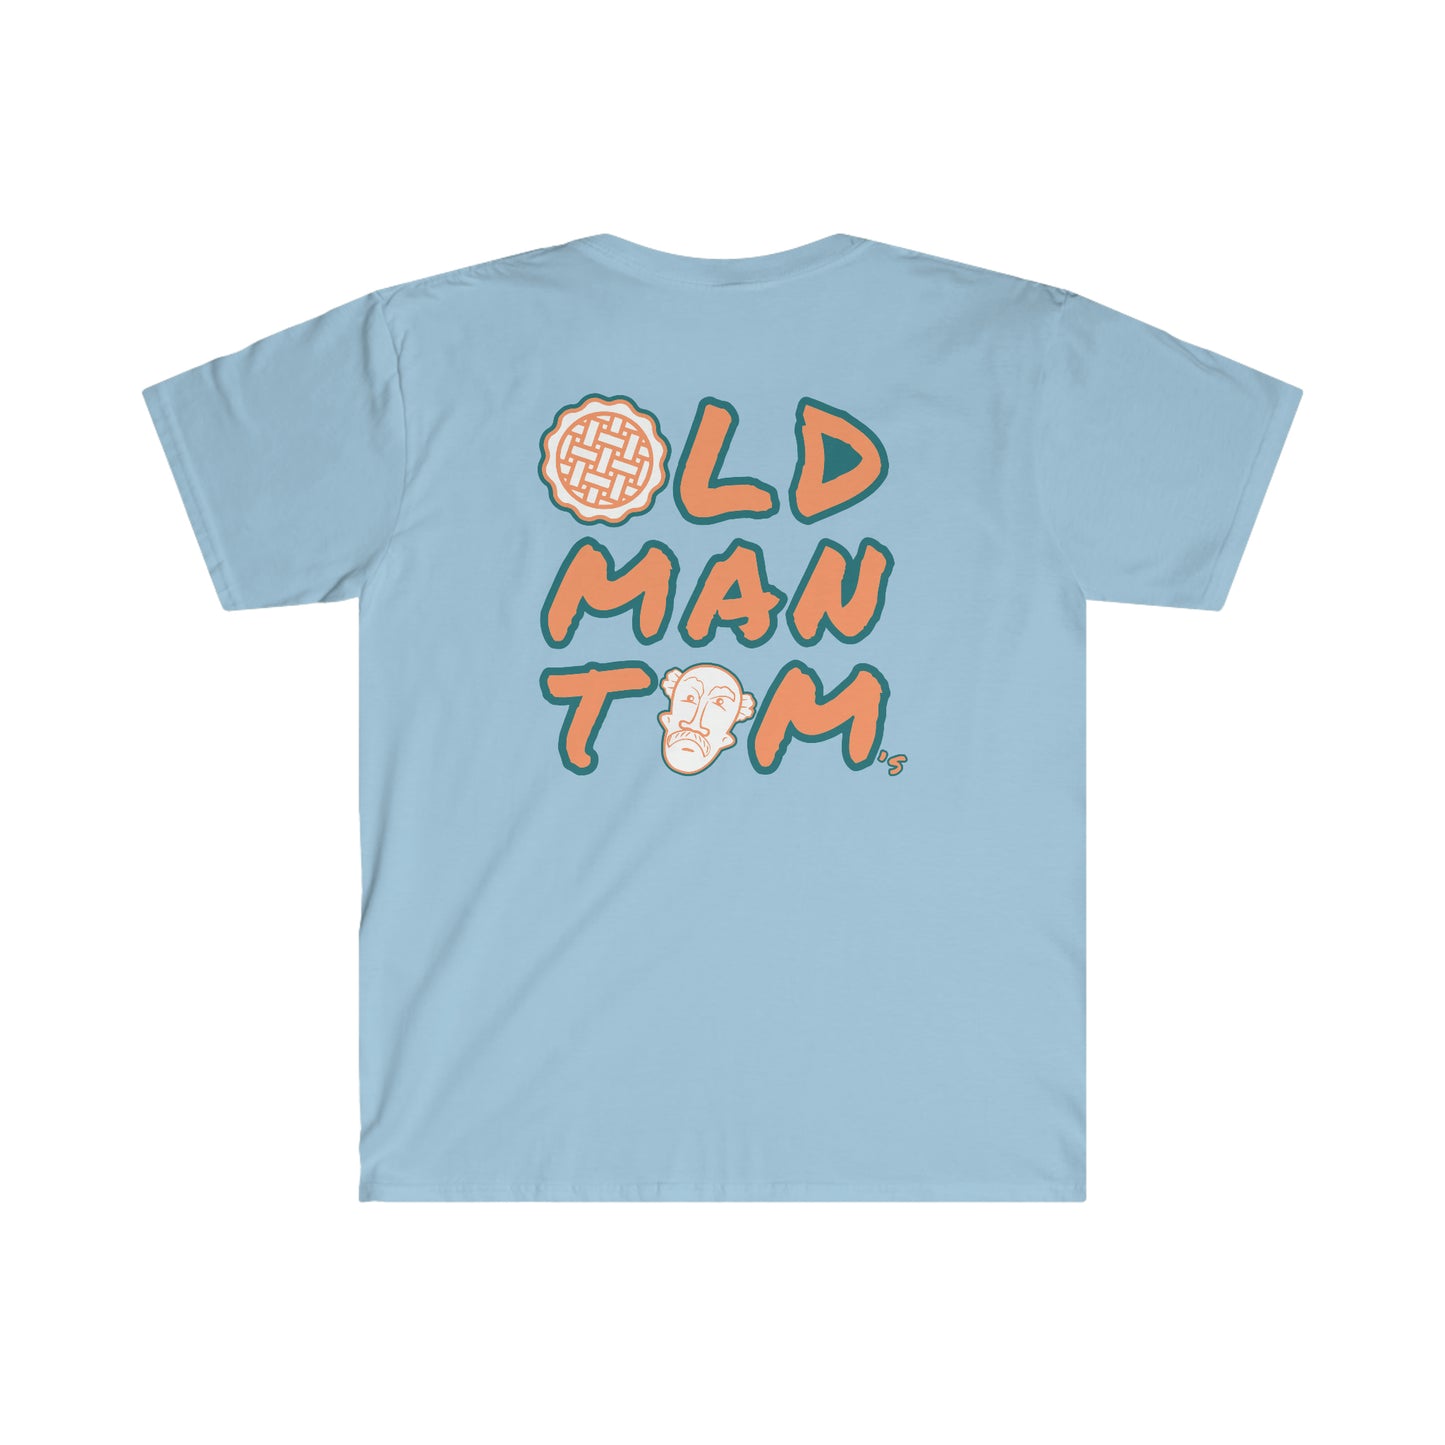 Old Man Tom's "I Can Read It" Unisex Softstyle T-Shirt